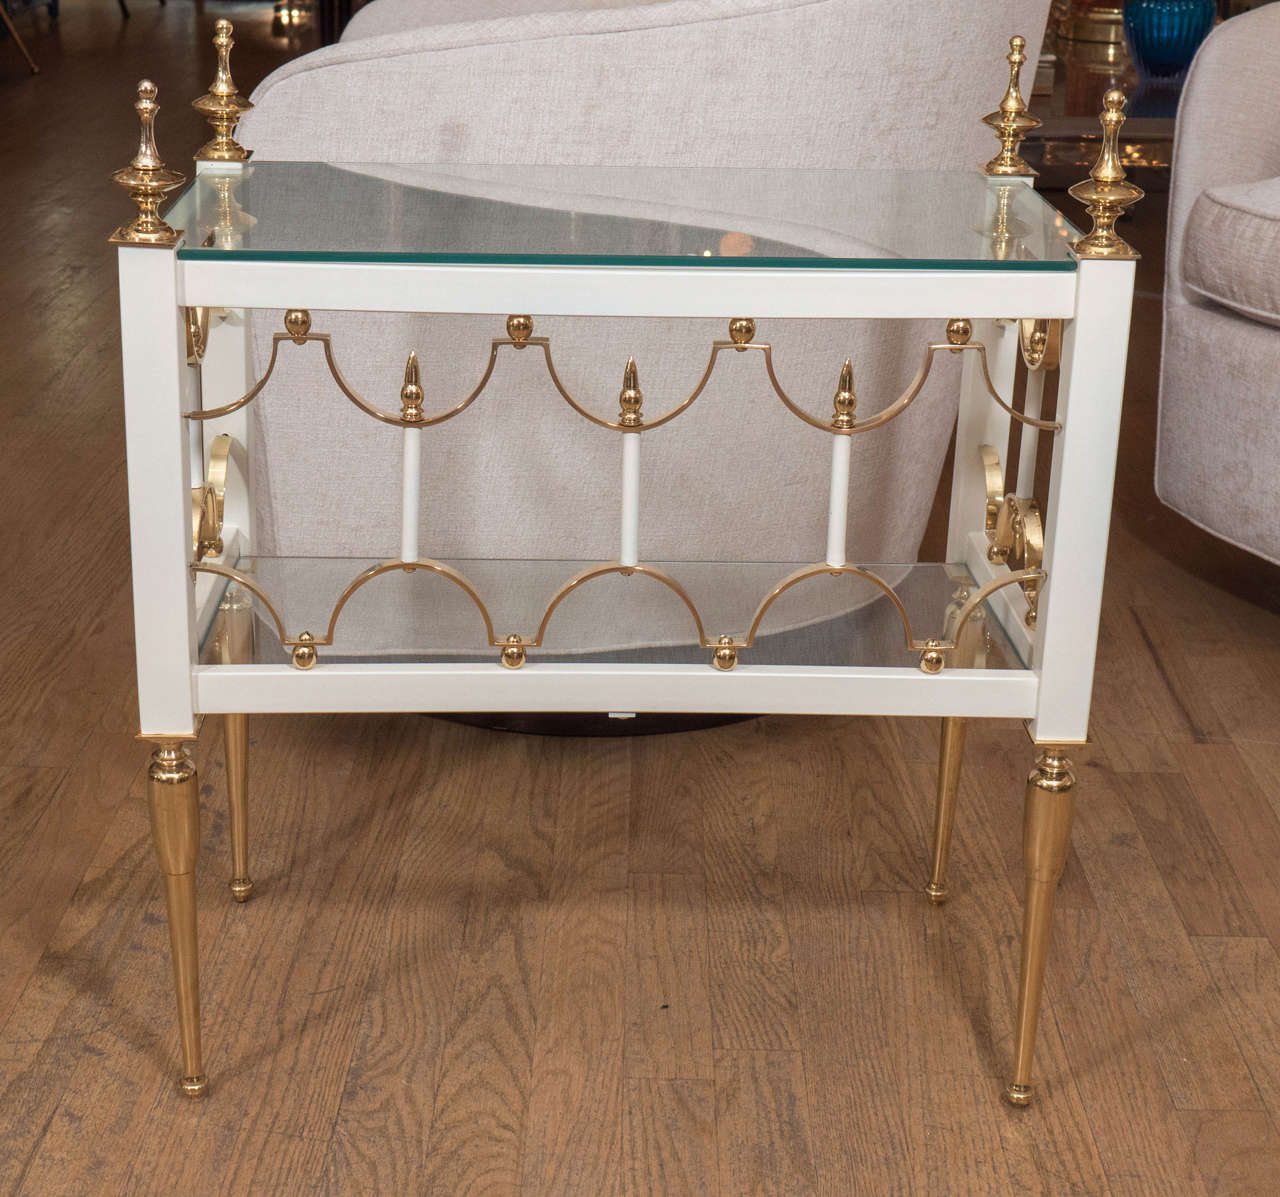 Pair of rectangular brass, white enameled metal and glass side tables with decorative details.